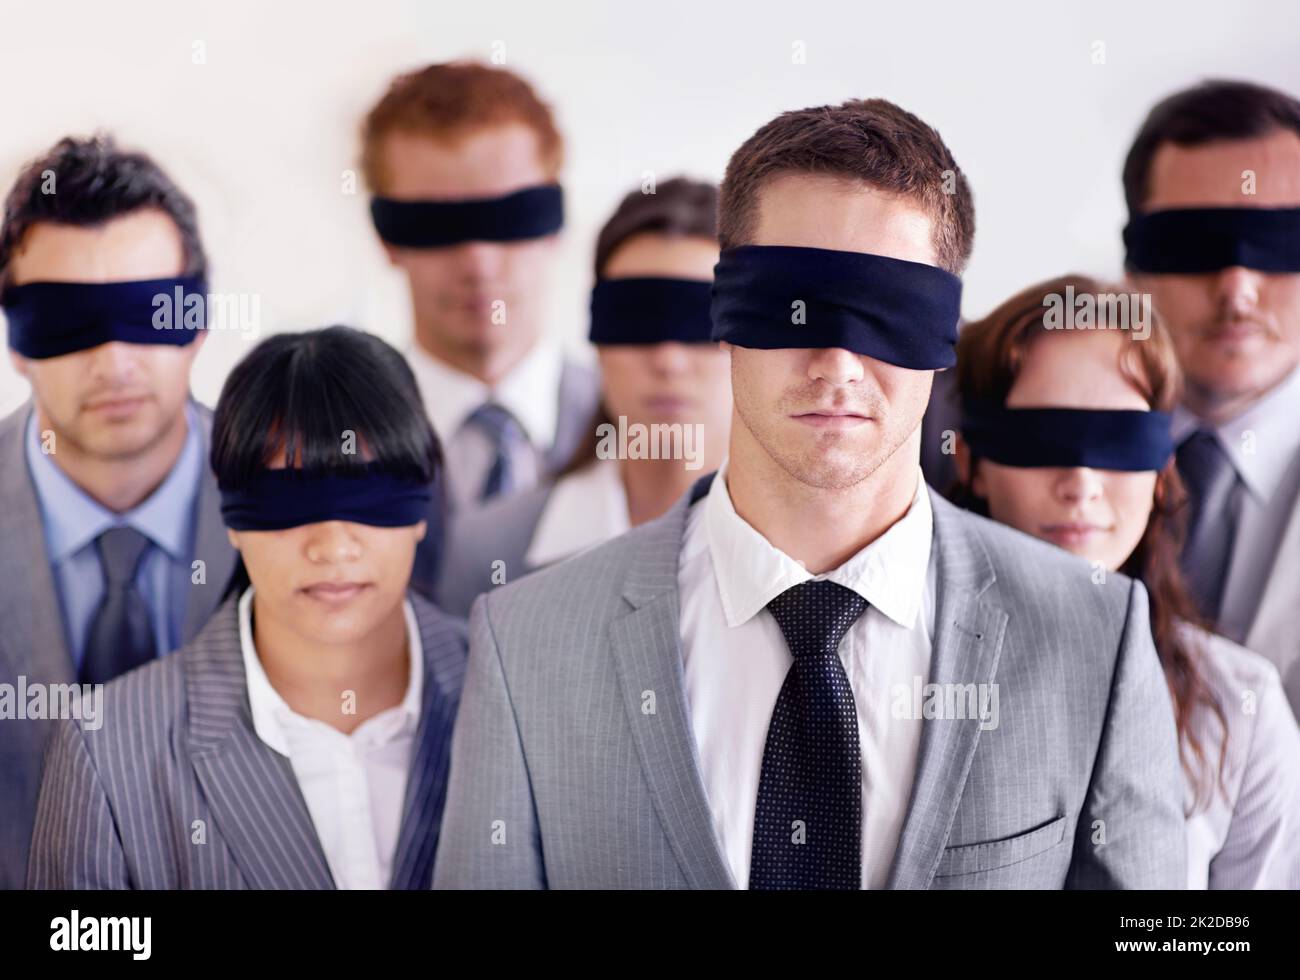 Happy Man Blindfold Person Showing Super Stock Photo 1696869070